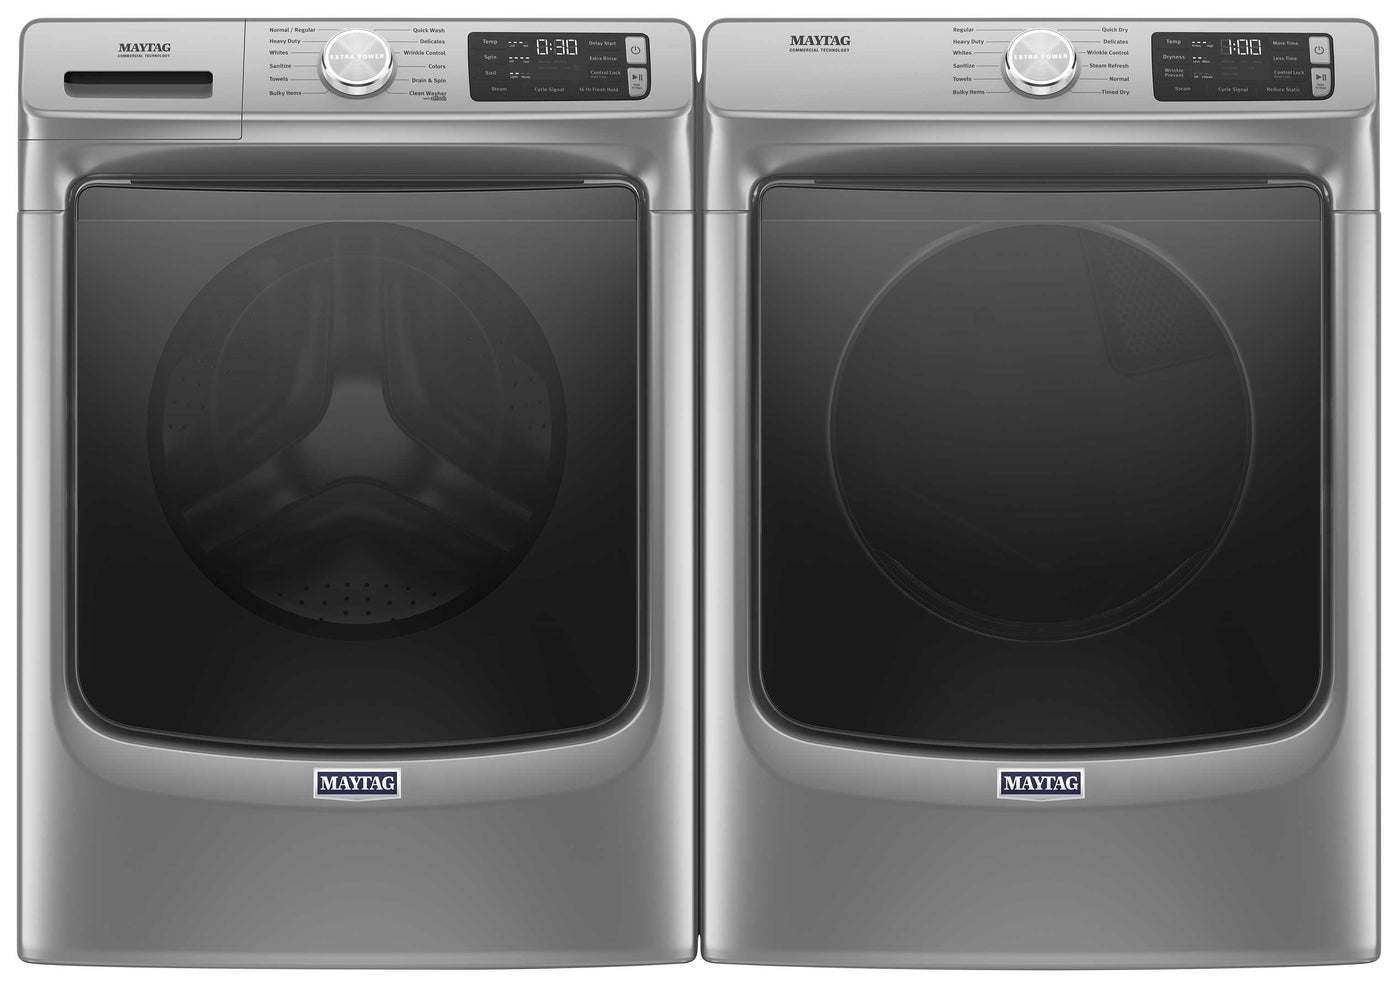 Maytag Metallic Slate Front-Load Washer (5.5 cu. ft.) & Electric Dryer (7.3 cu. ft.) - MHW6630HC/YMED6630HC